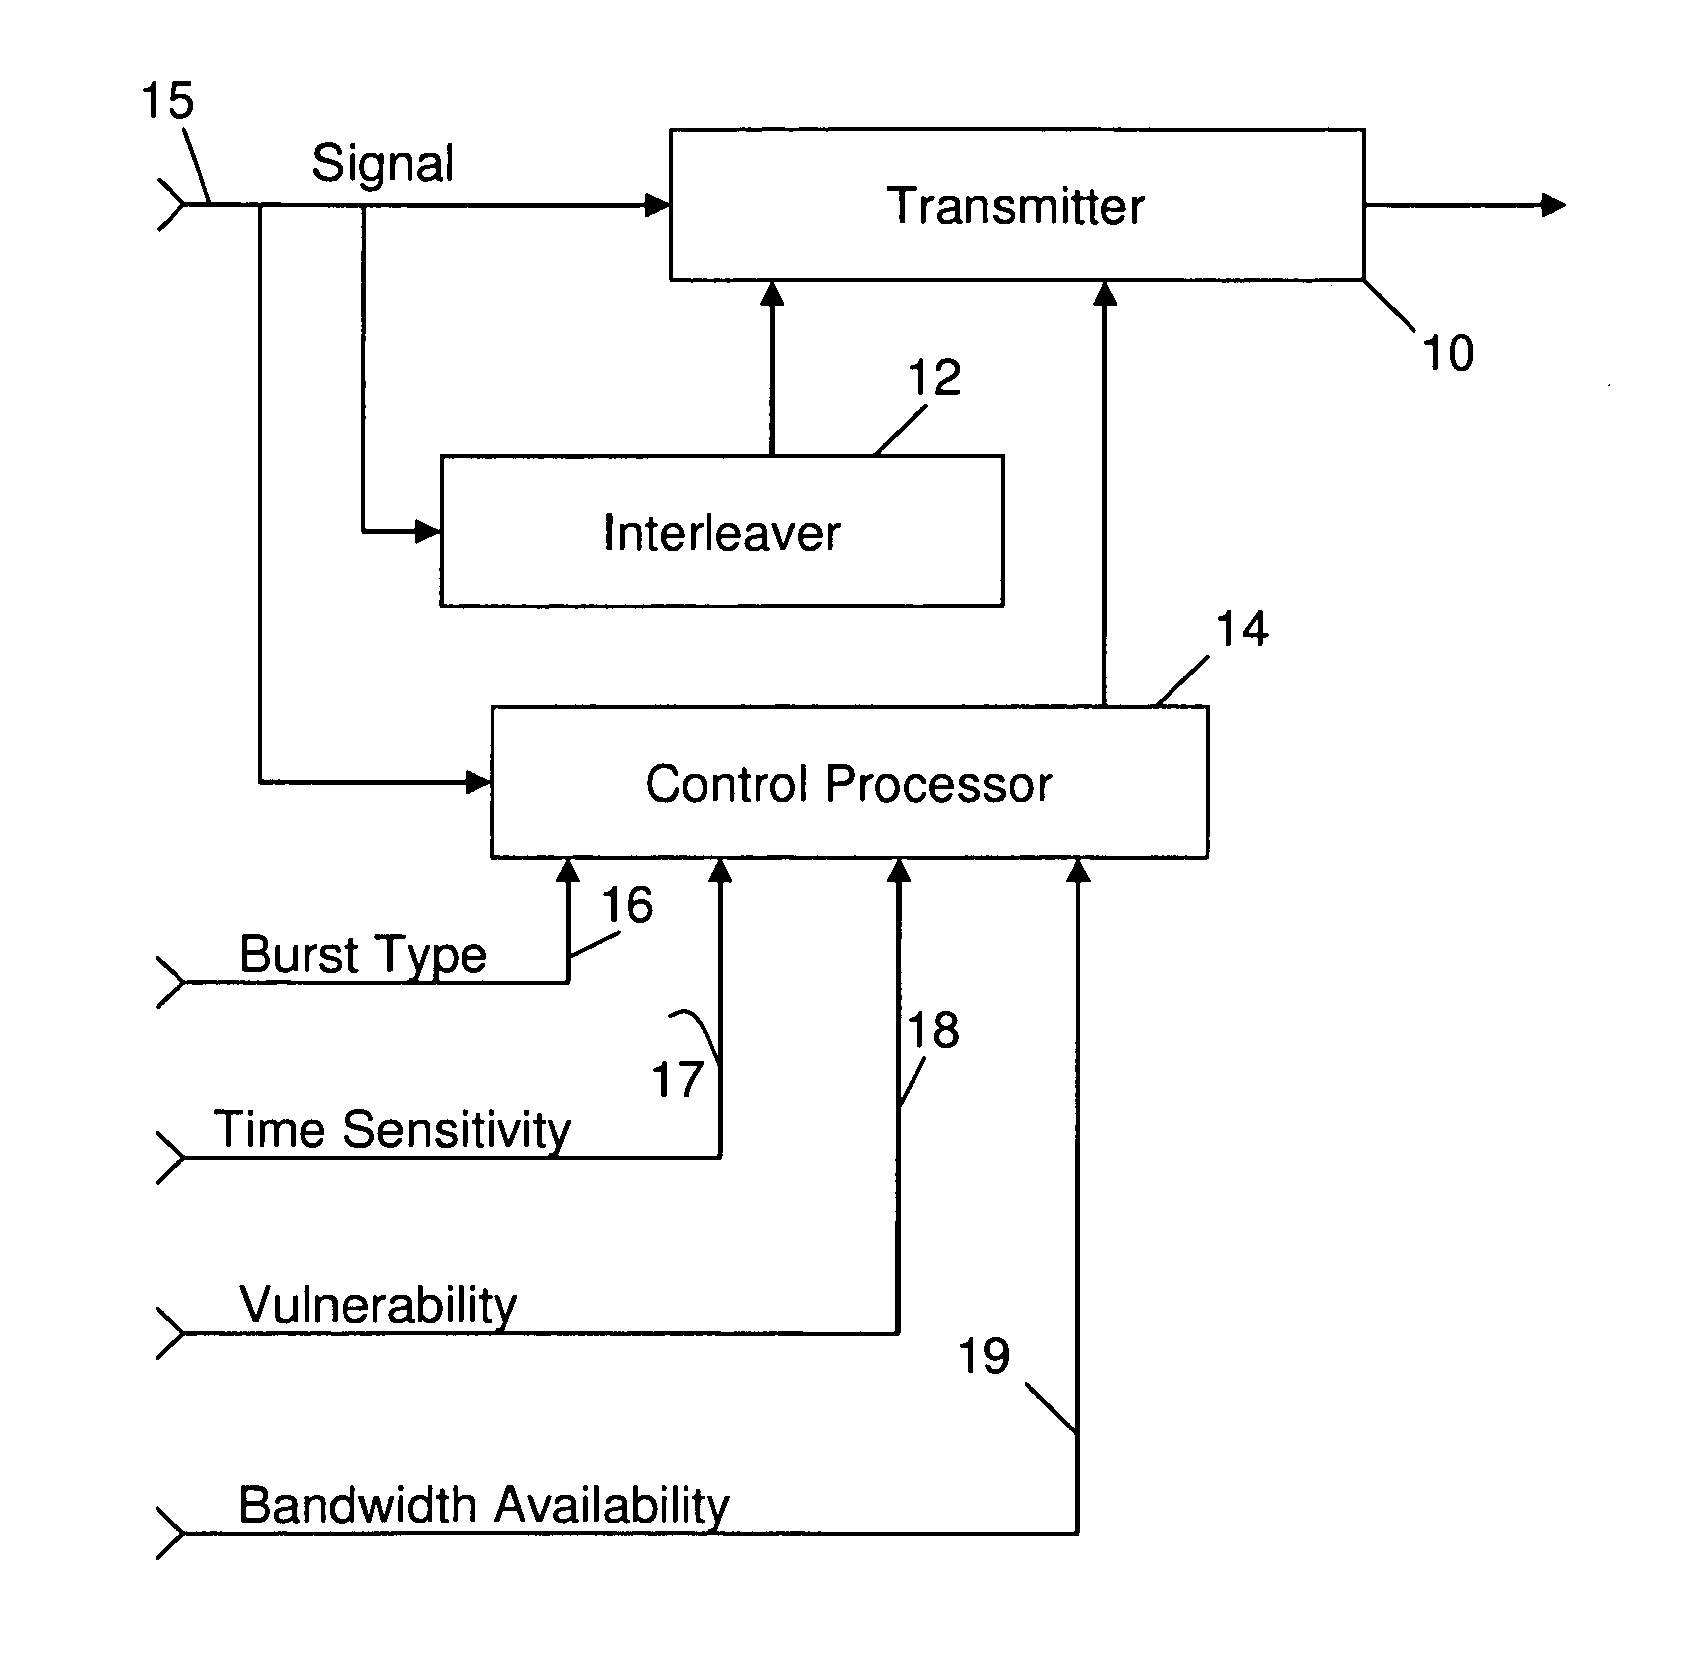 Preserving the content of a communication signal corrupted by interference during transmission